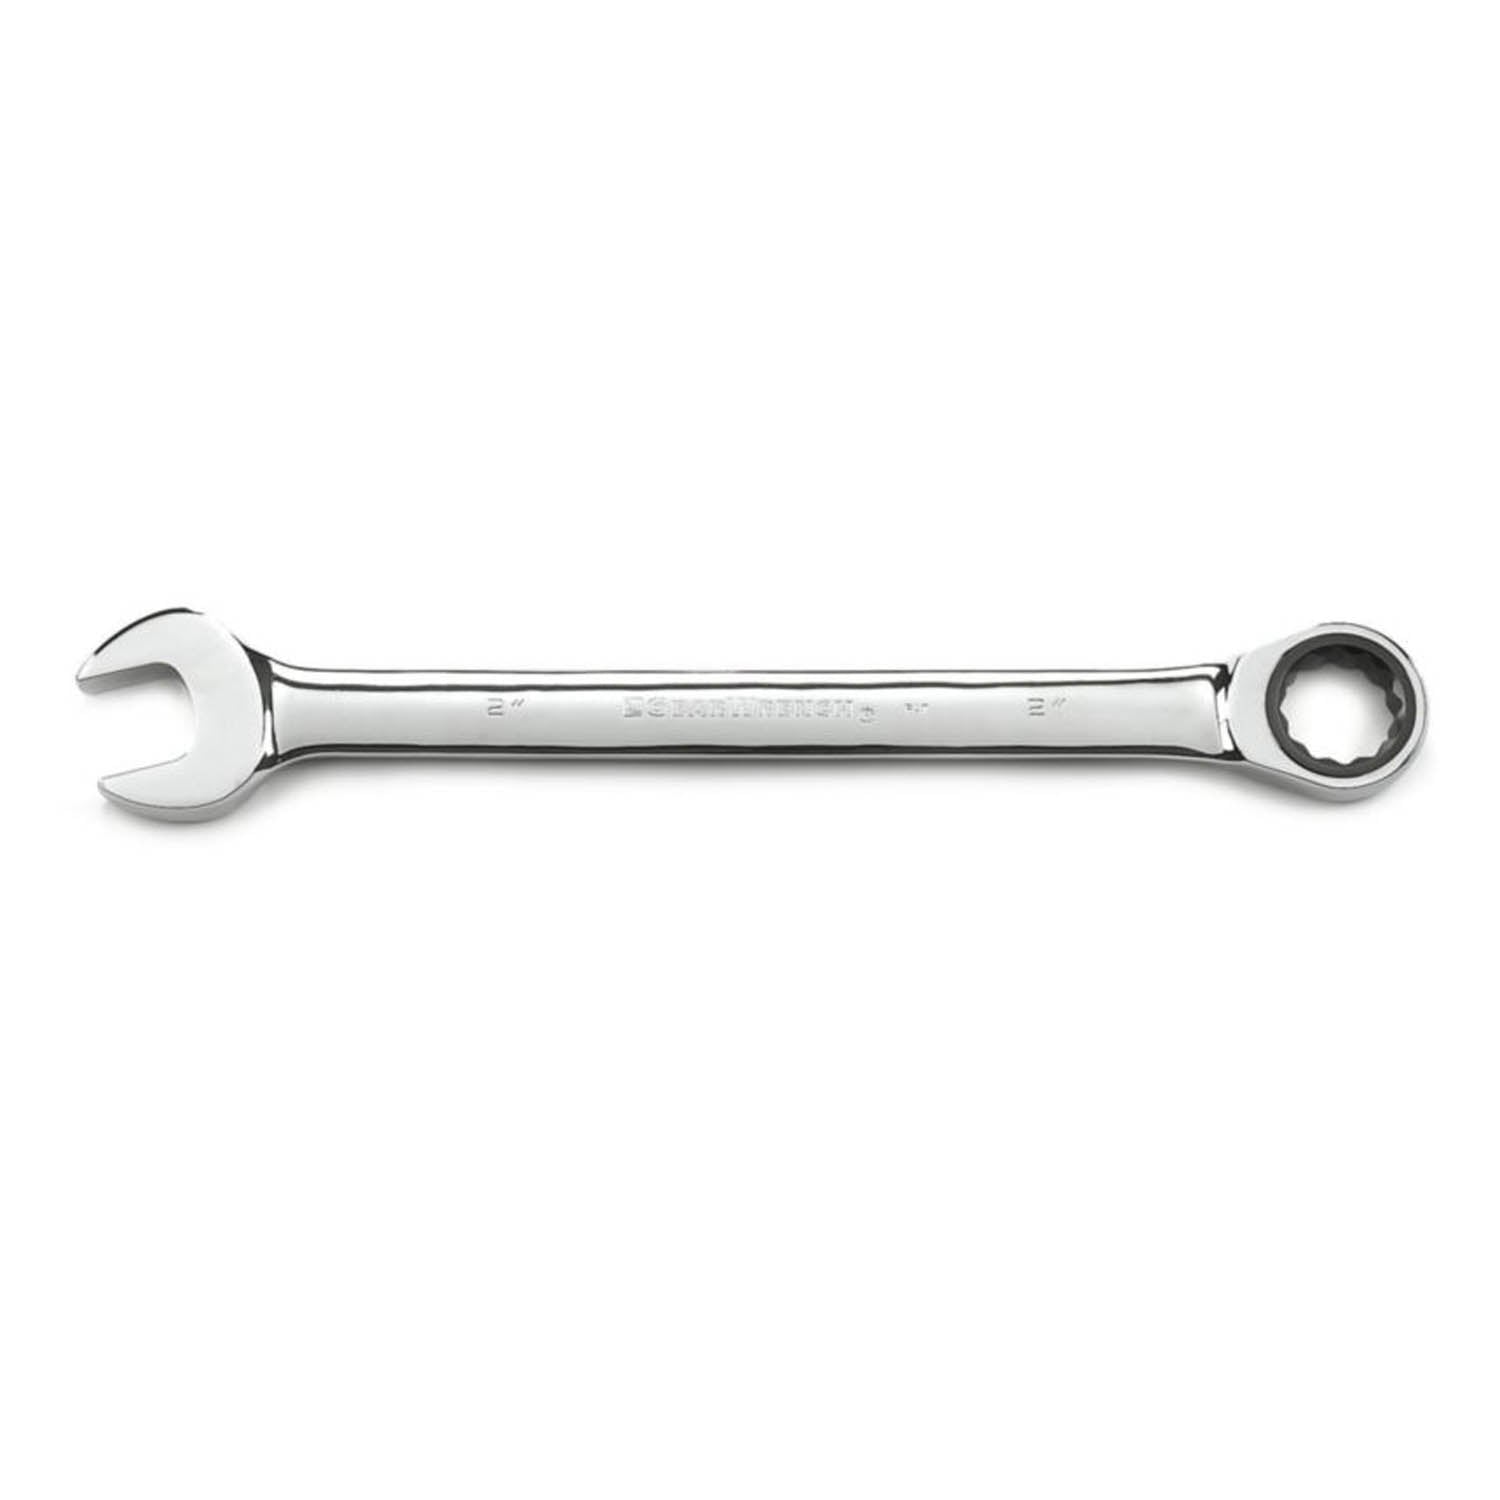 Apex Tool Group Combination Ratcheting Wrench (Sizes: 10MM, 11/16